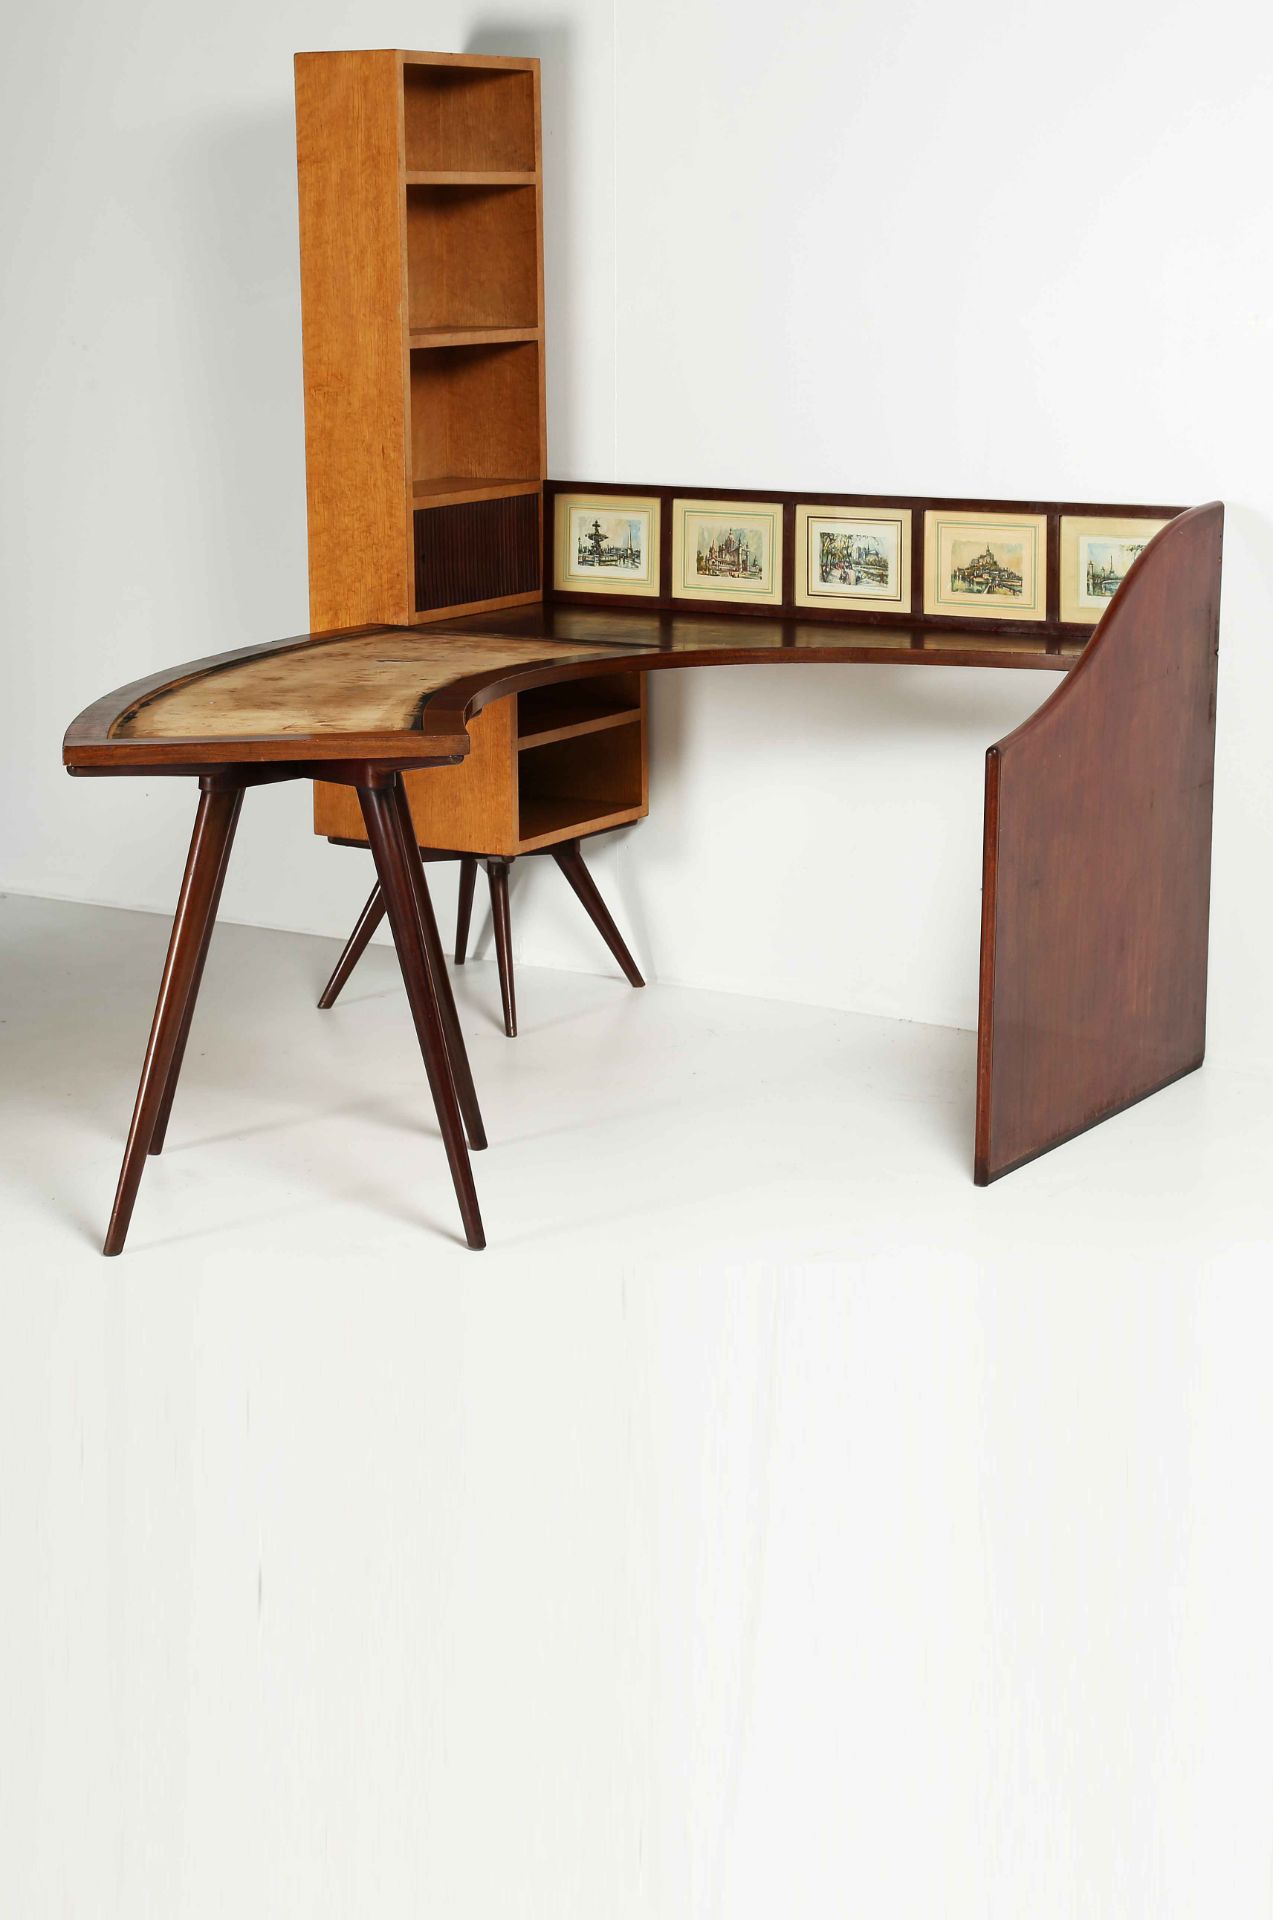 MANDOLINI GIORGIO (n. 1913)
Desk complete with matching bookcase and wall unit.
Bibl. L'